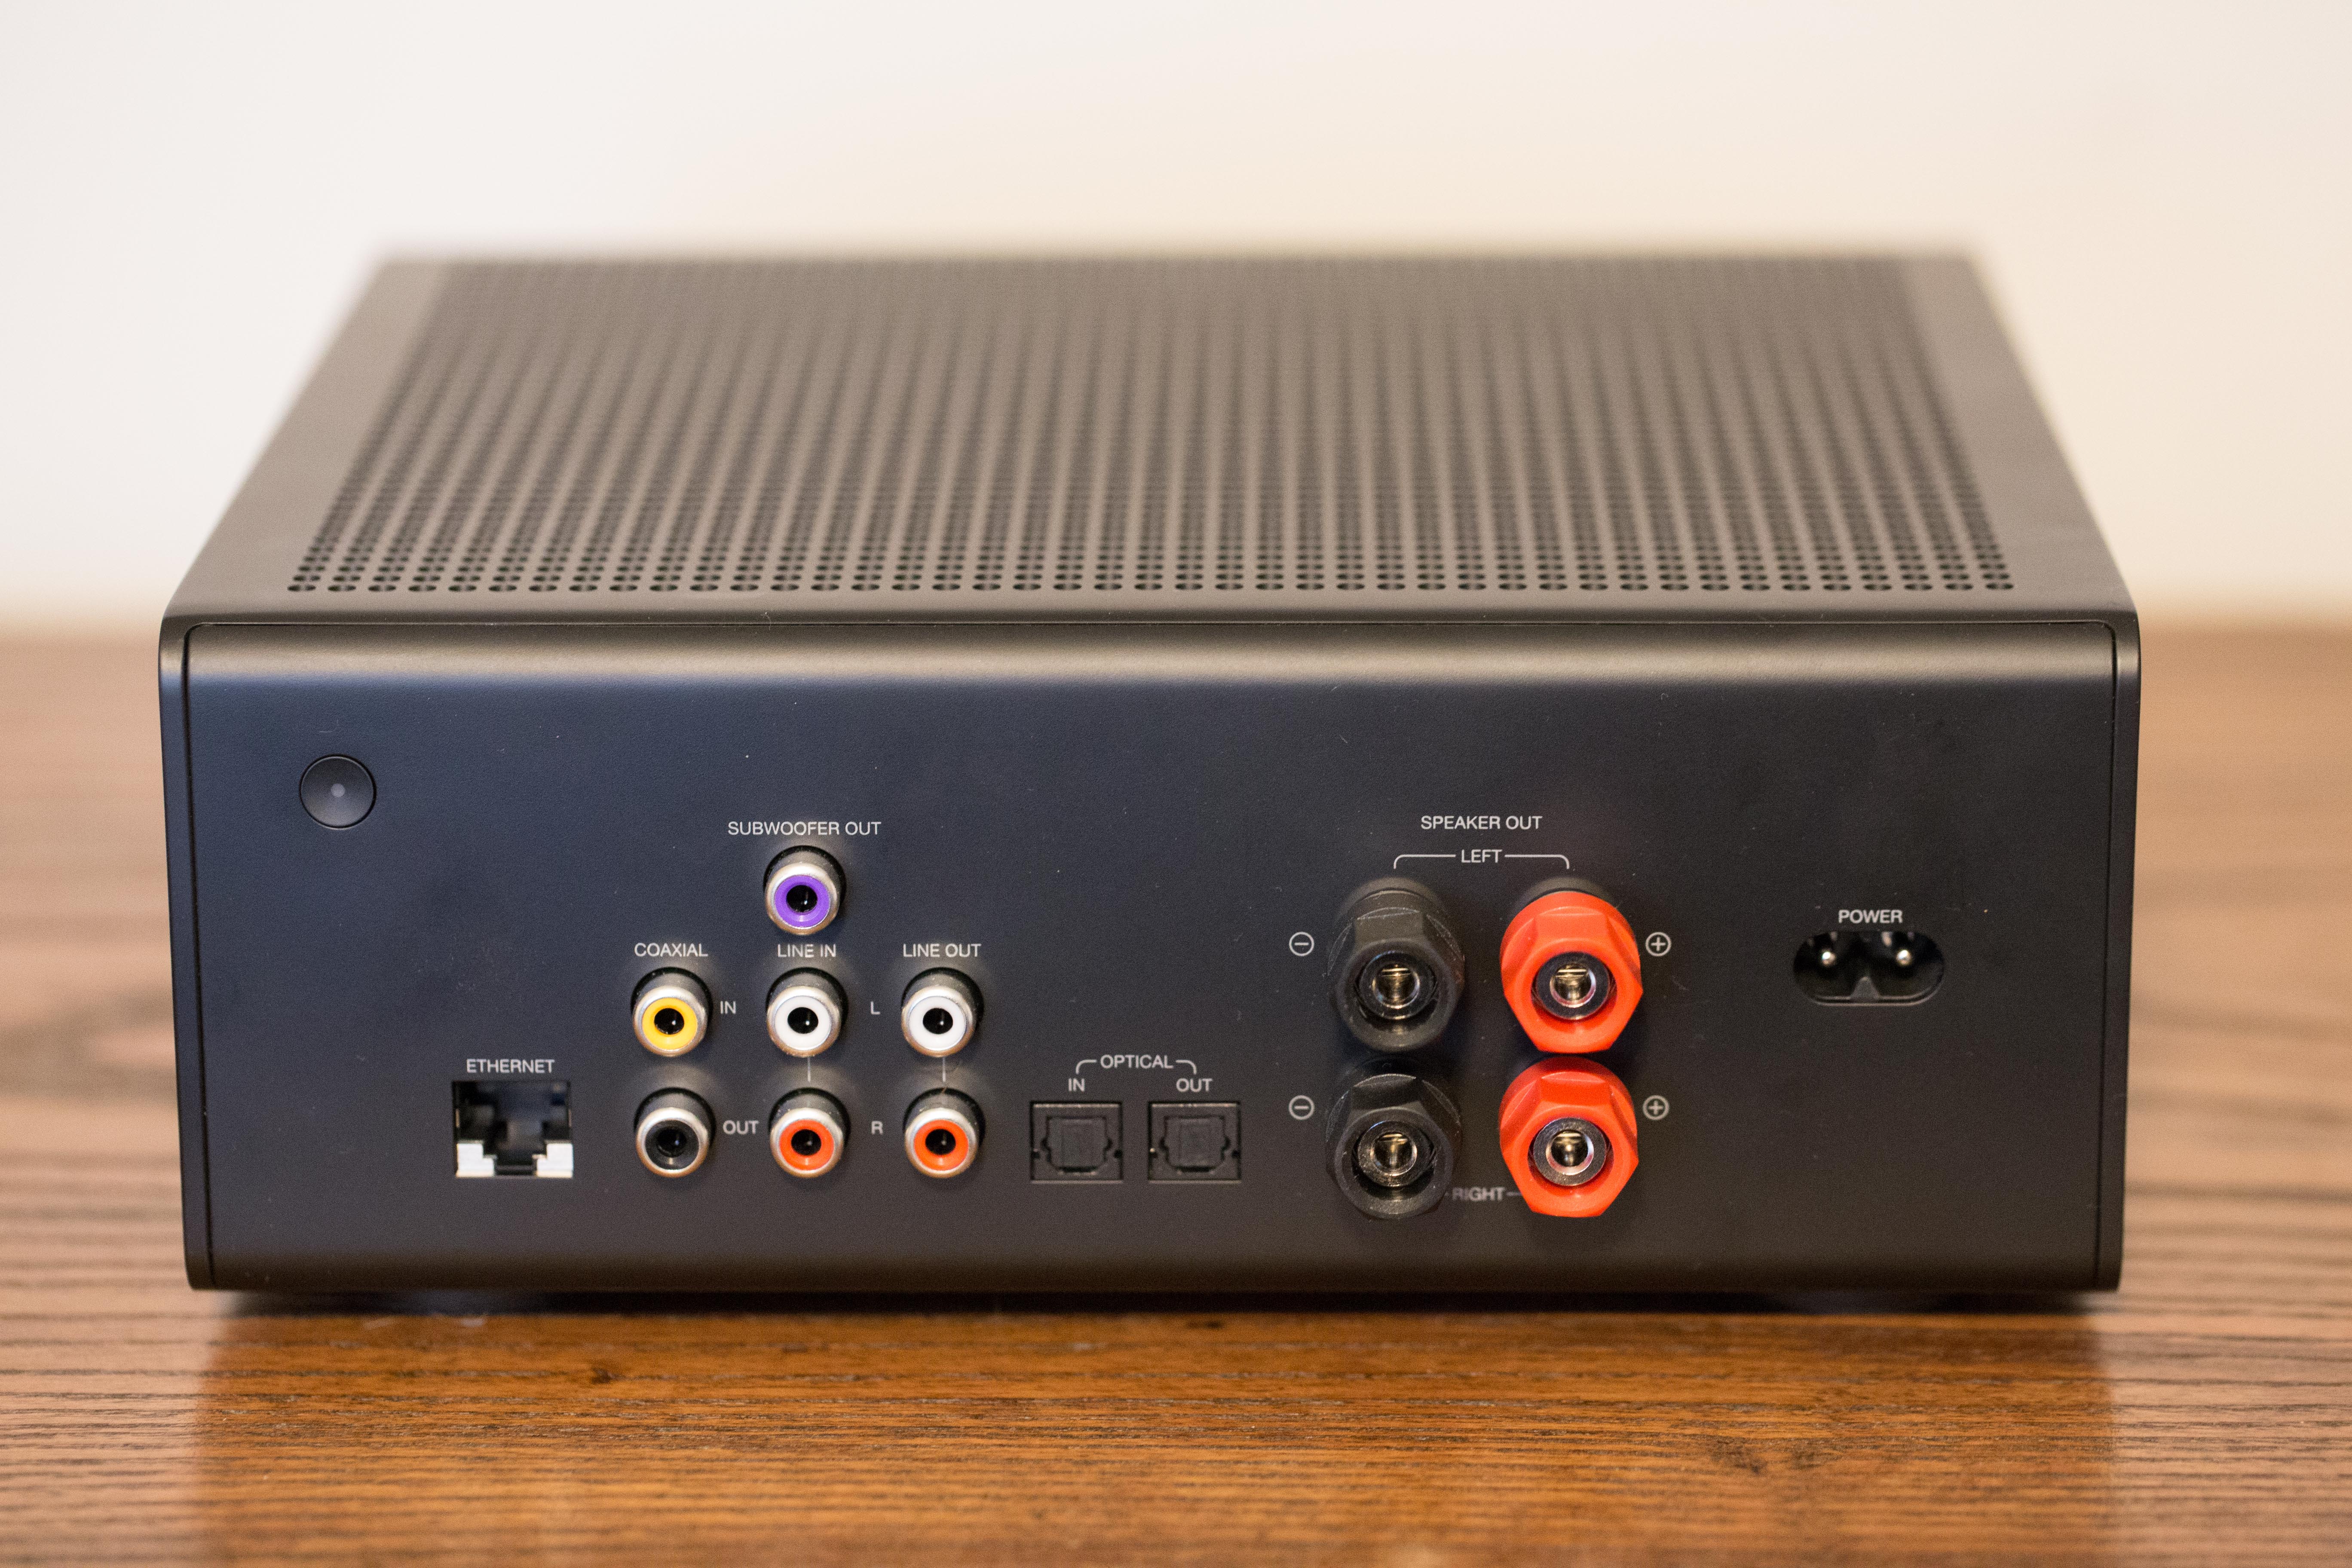 Review: The 9 Echo Link Amp adds Alexa to any speaker